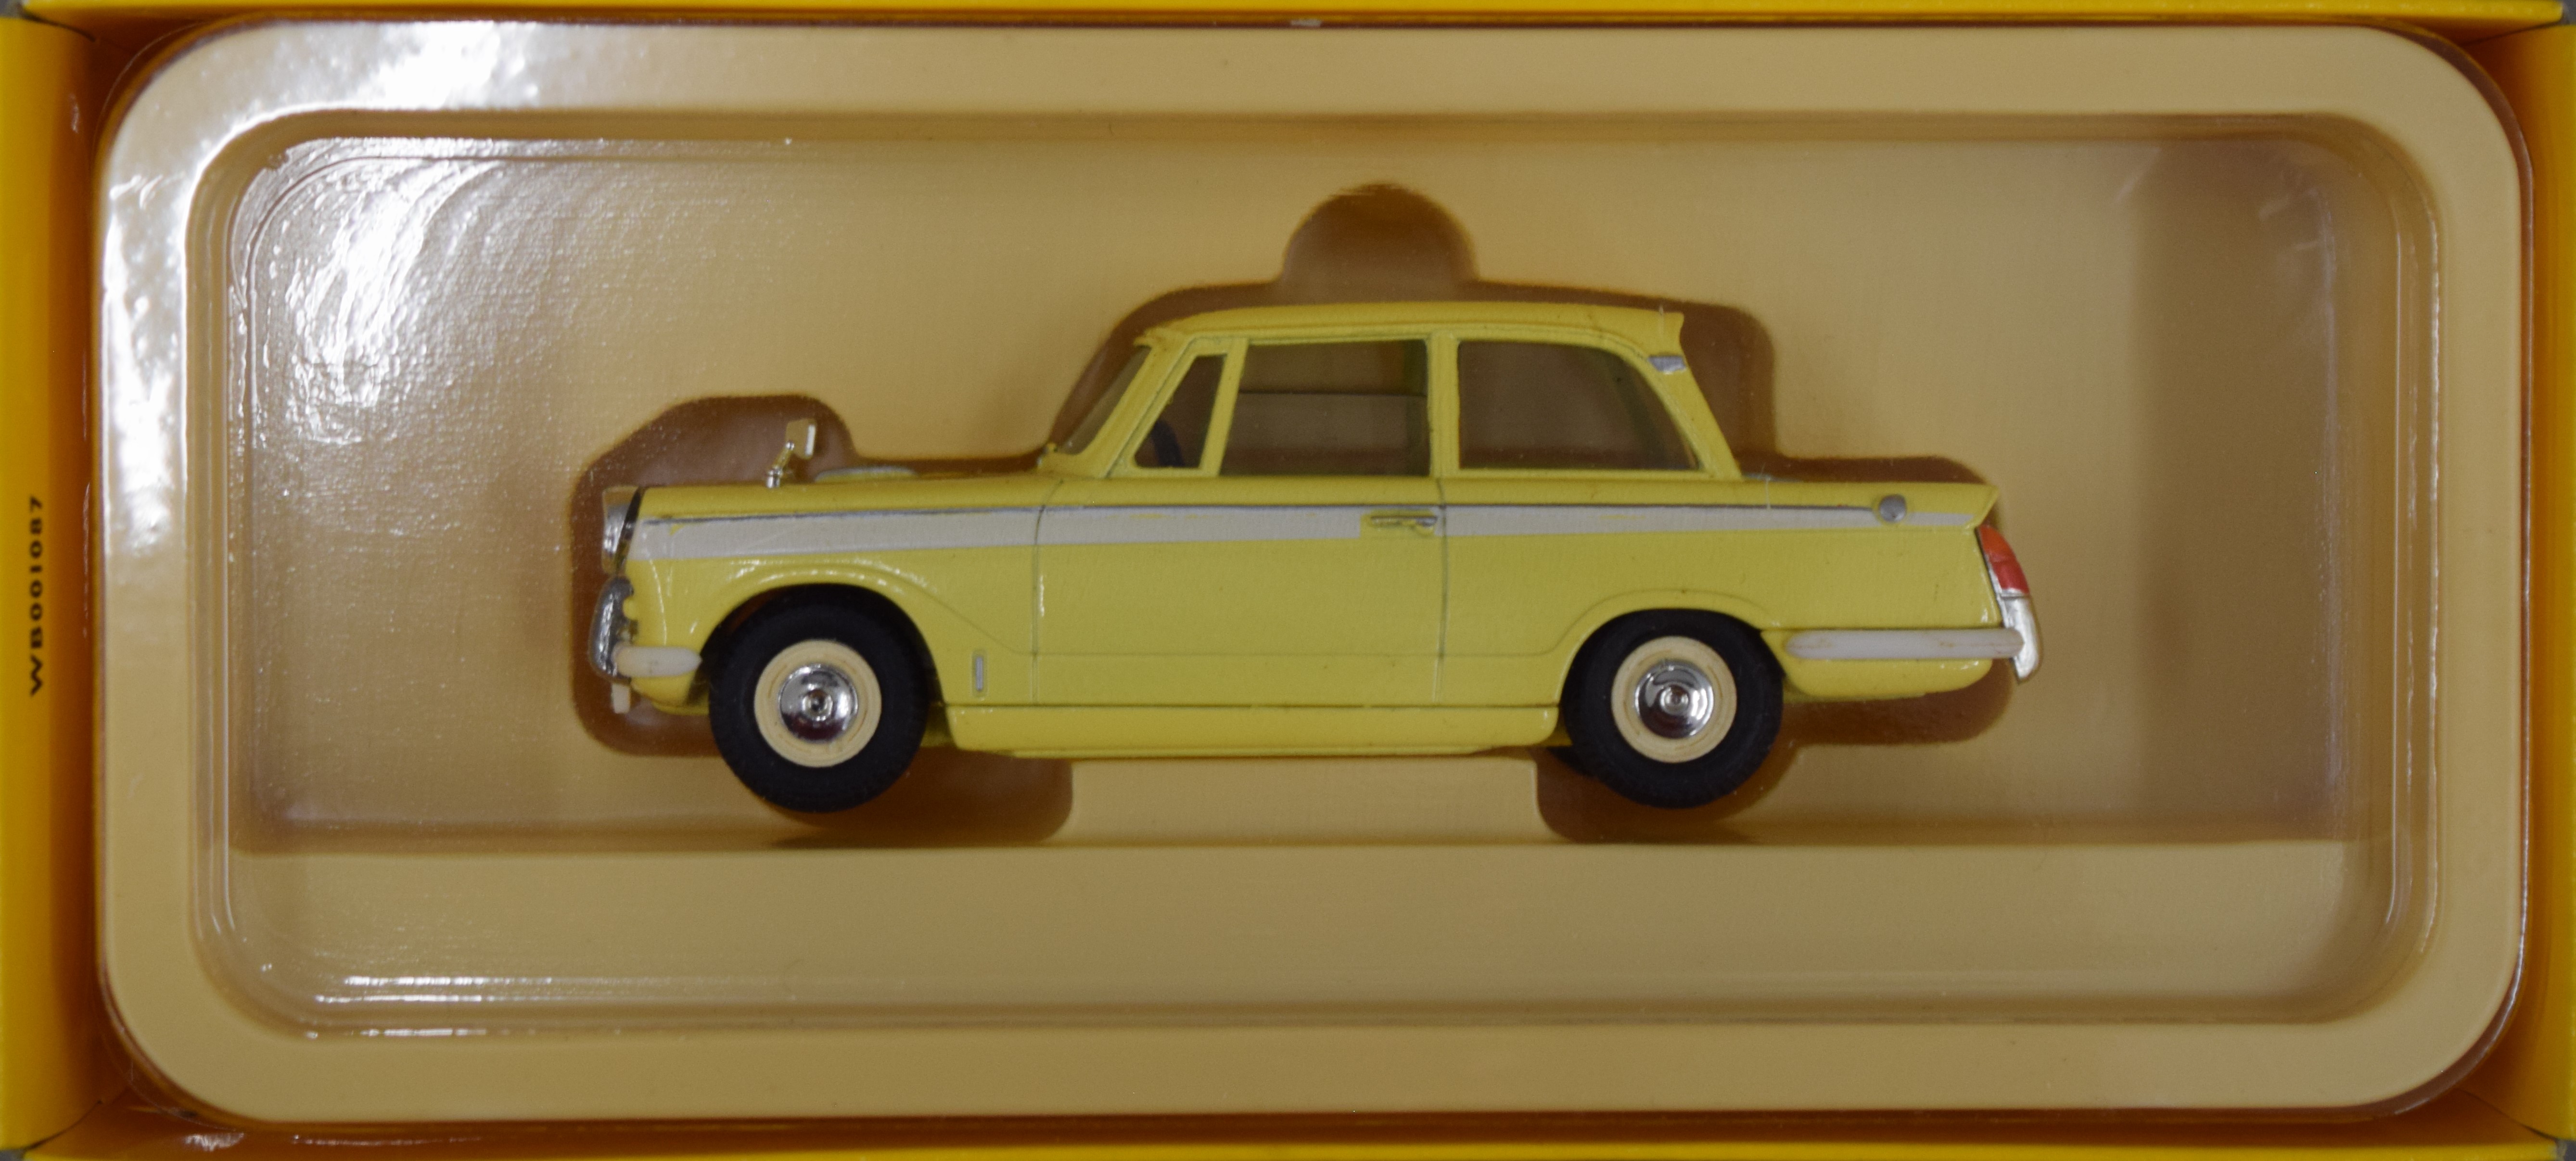 A boxed 1960's Triumph Herald yellow with white stripe Lledo/Vanguard limited edition, - Image 19 of 20